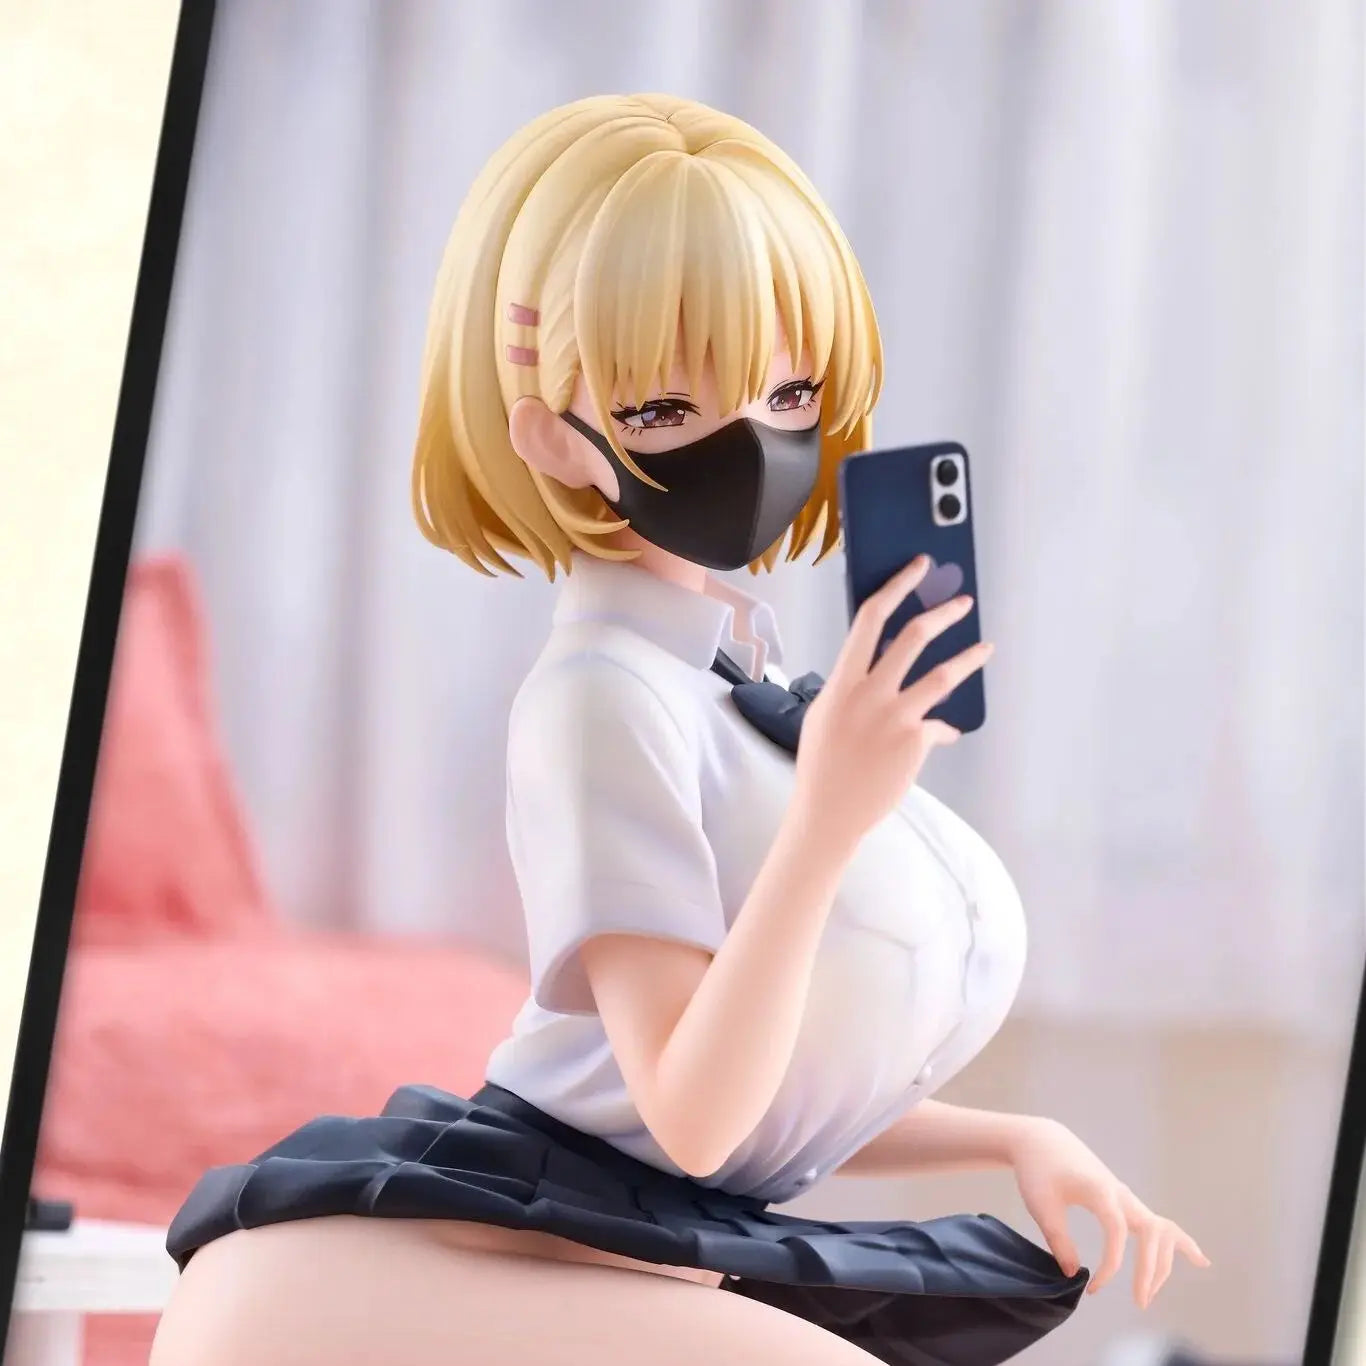 15cm NSFW Lovely Project Himeko PVC Cute Sexy Girl Anime Action Figure Hentai Collectable Model Adult Toy Doll Gift